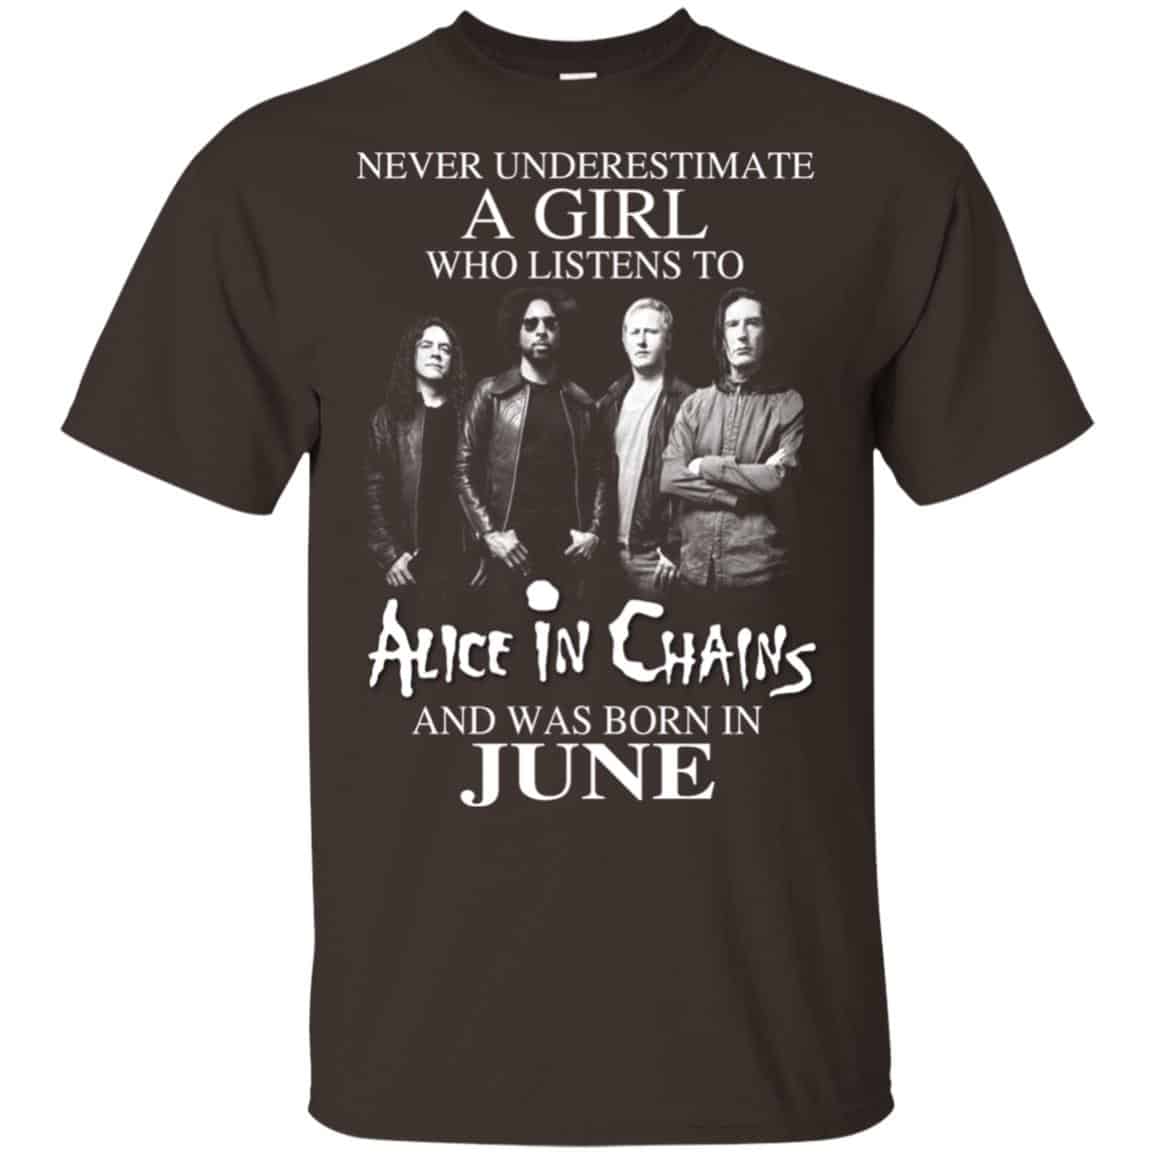 A Girl Who Listens To Alice In Chains And Was Born In June T Shirts Hoodie Tank 0stees